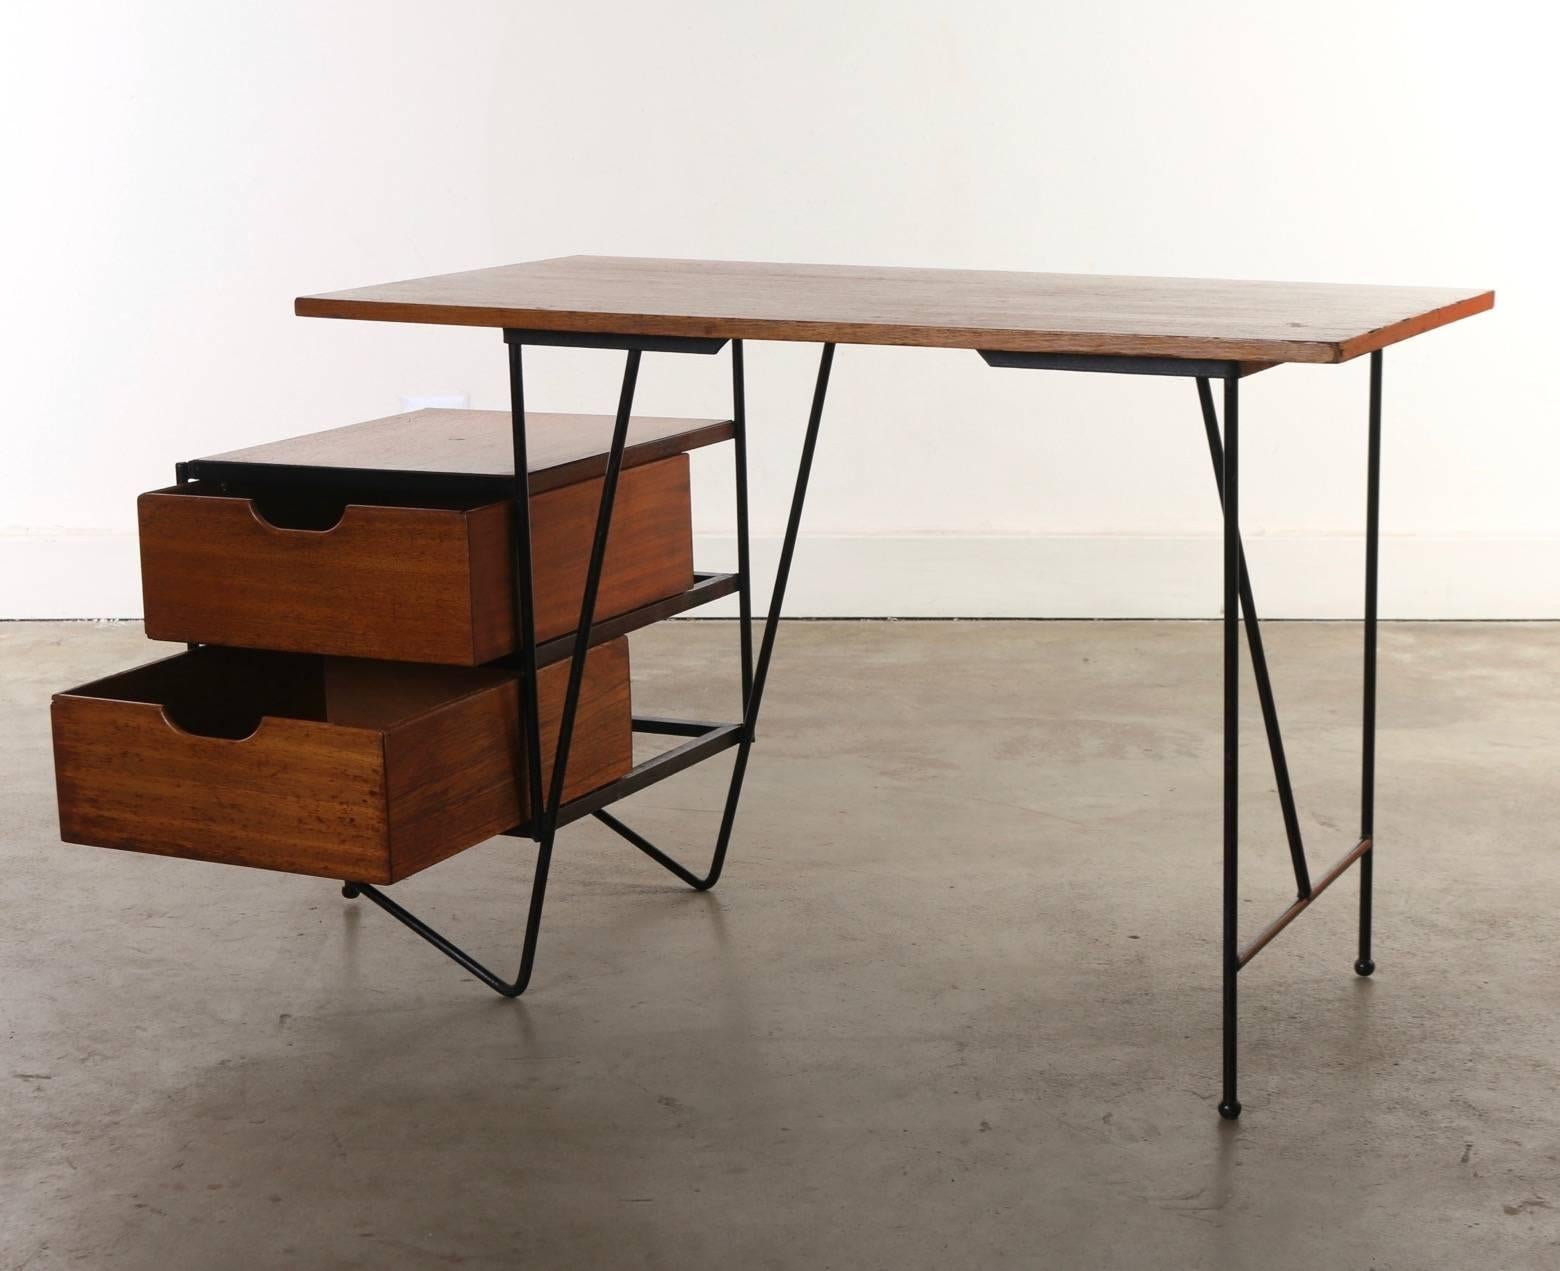 Mid-Century Modern Vista Furniture Company Desk by D.R. Bates and Jackson Gregory Jr., USA, 1955